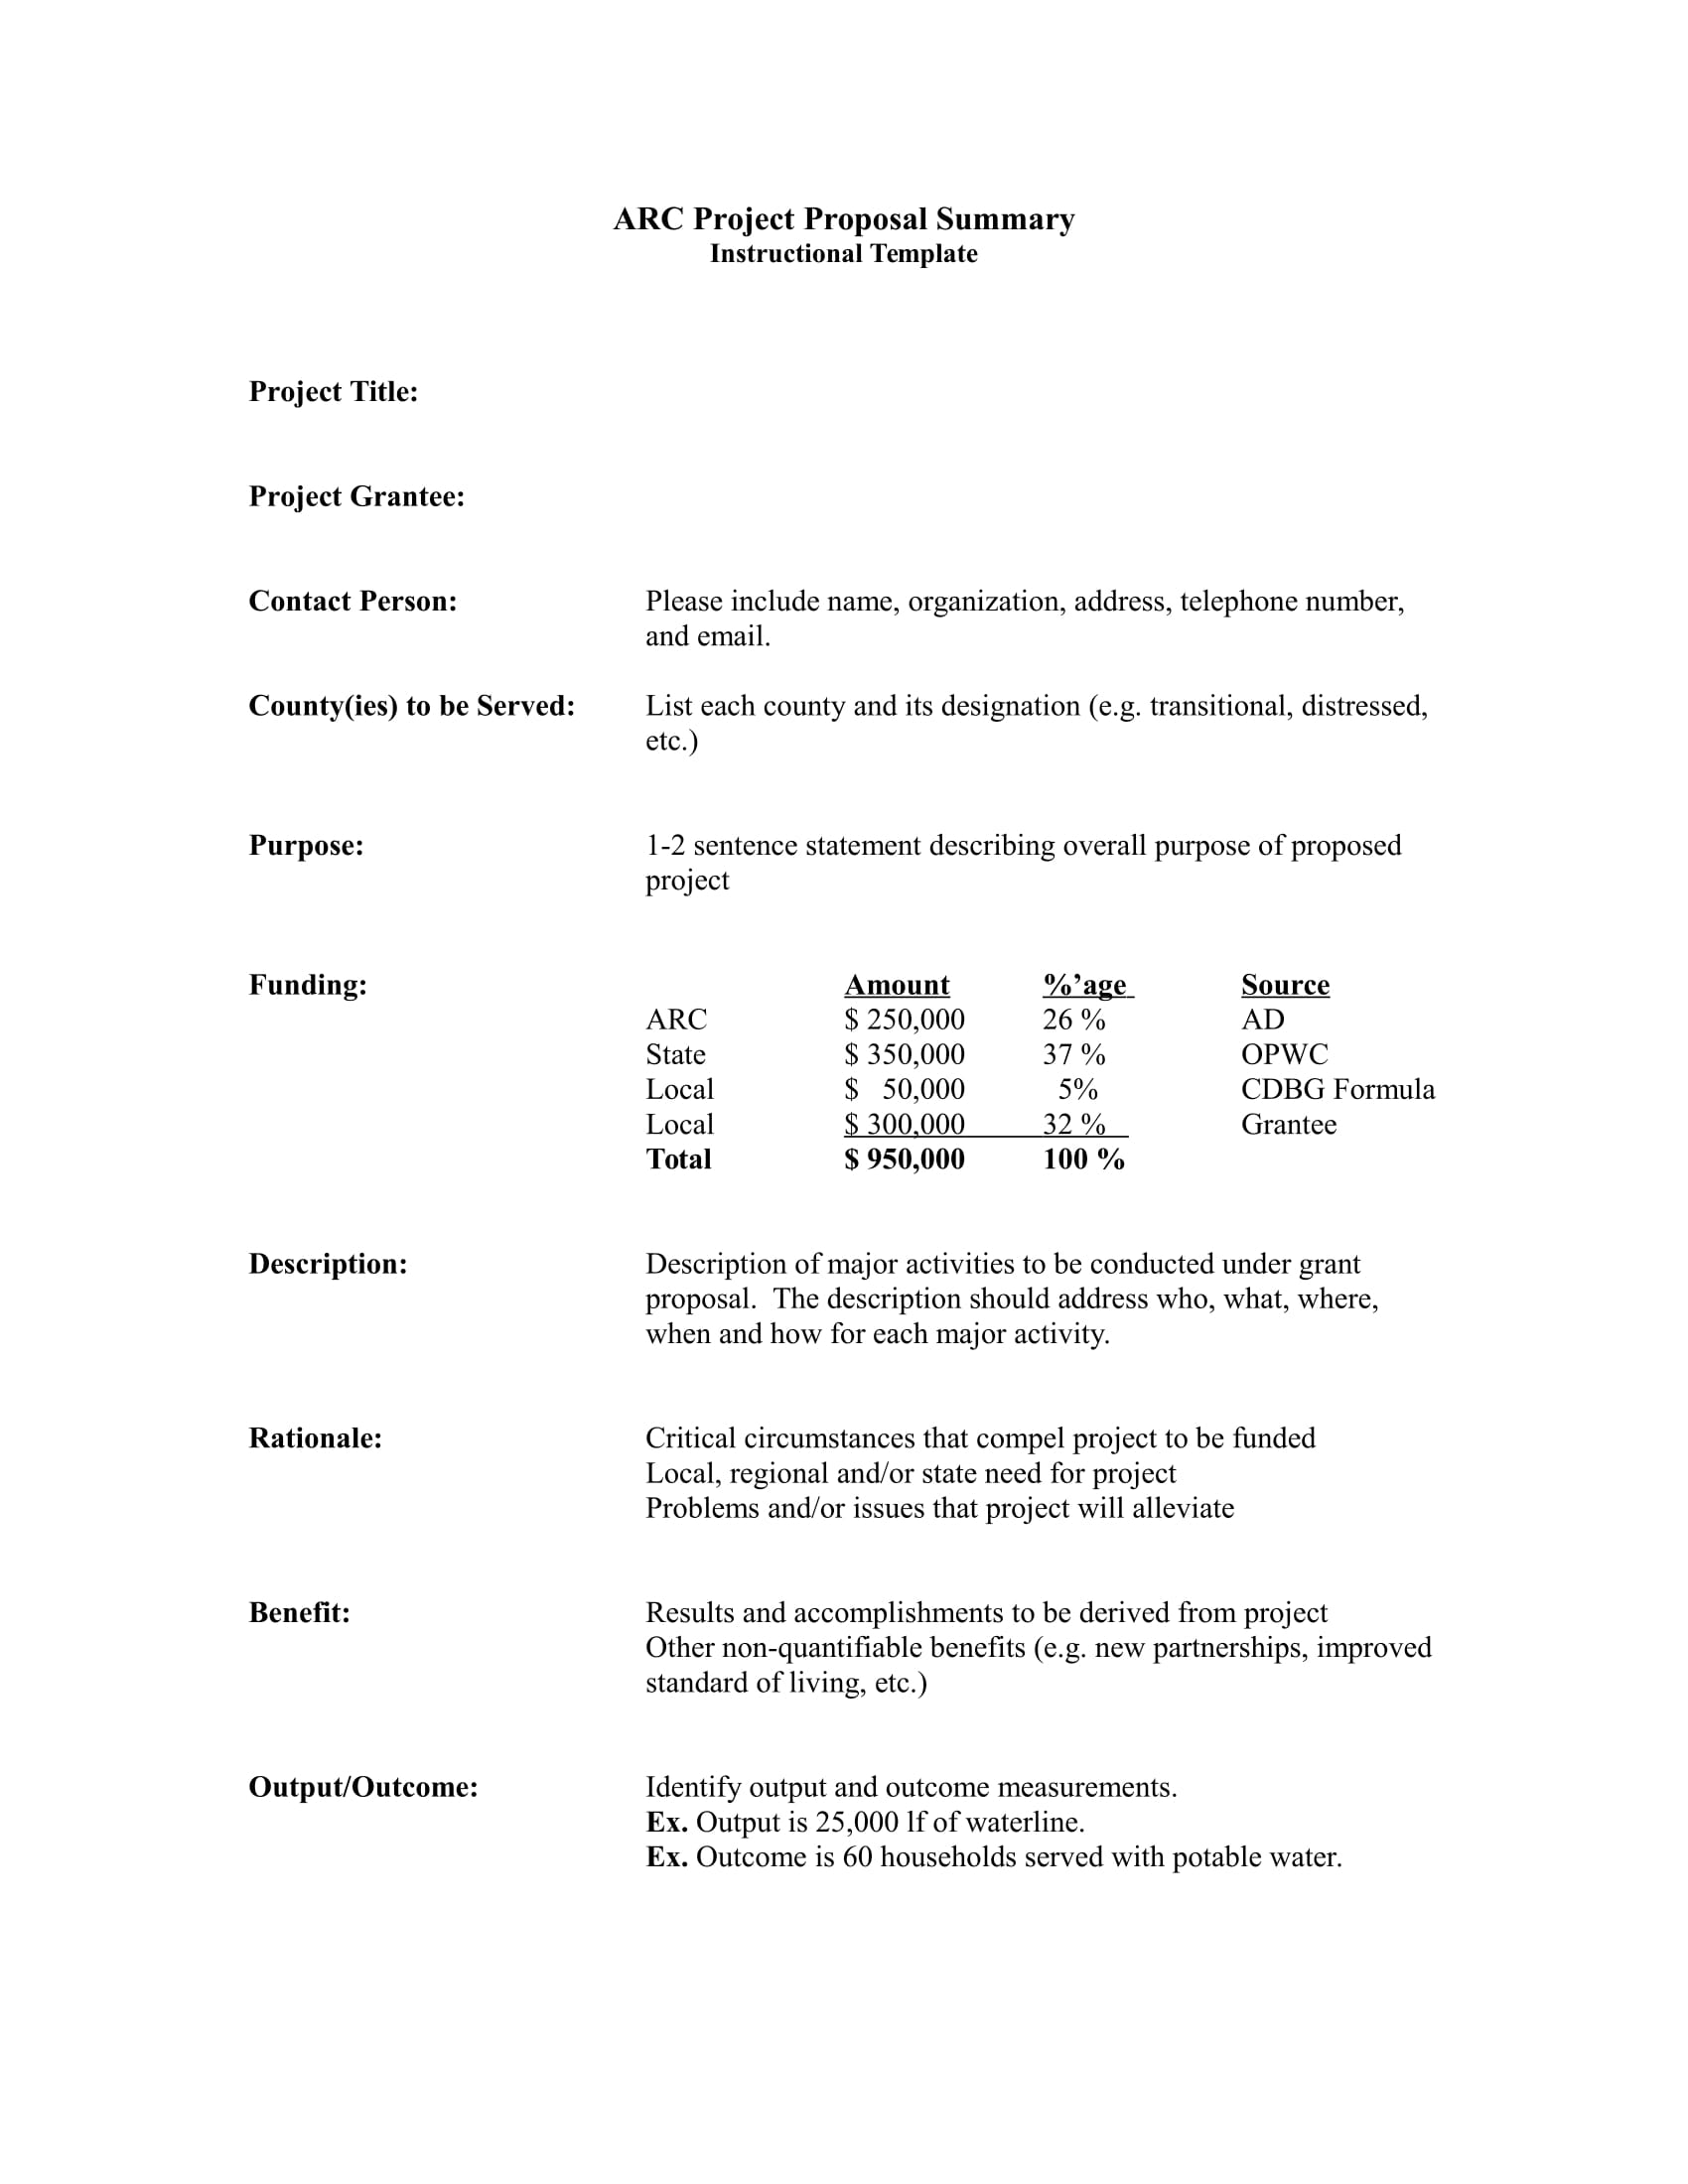 Project Summary Format Example